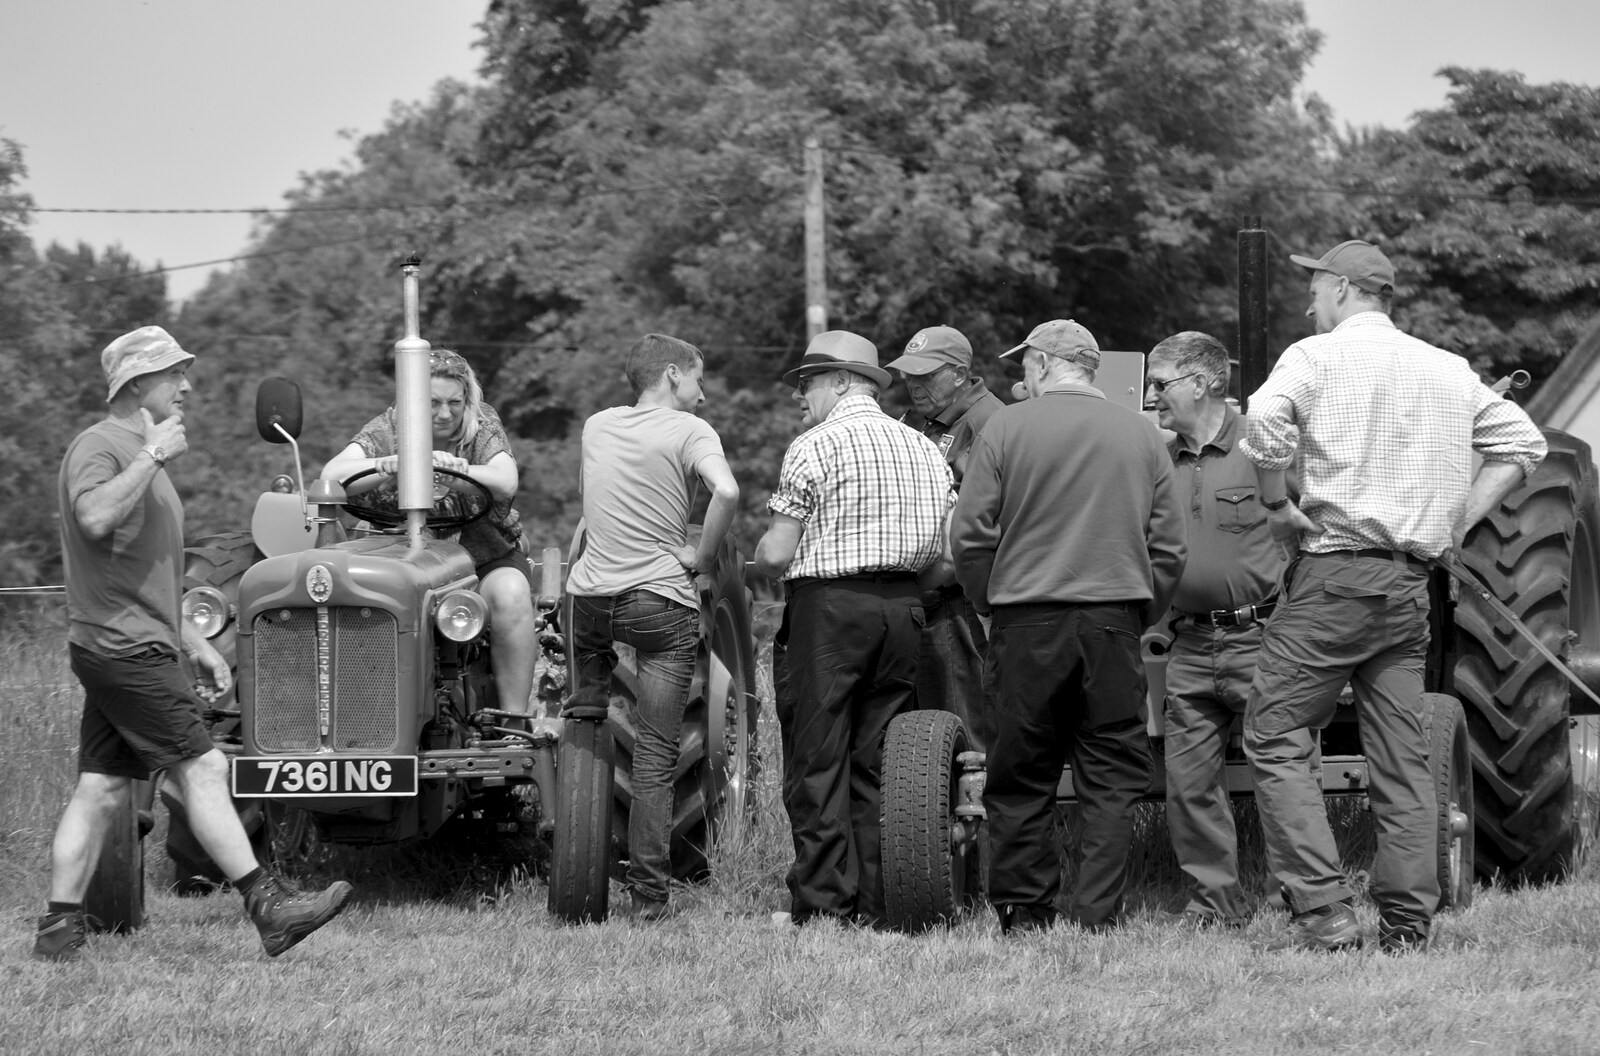 There's some kind of tractor conference going on from A Hog Roast on Little Green, Thrandeston, Suffolk - 23rd June 2019